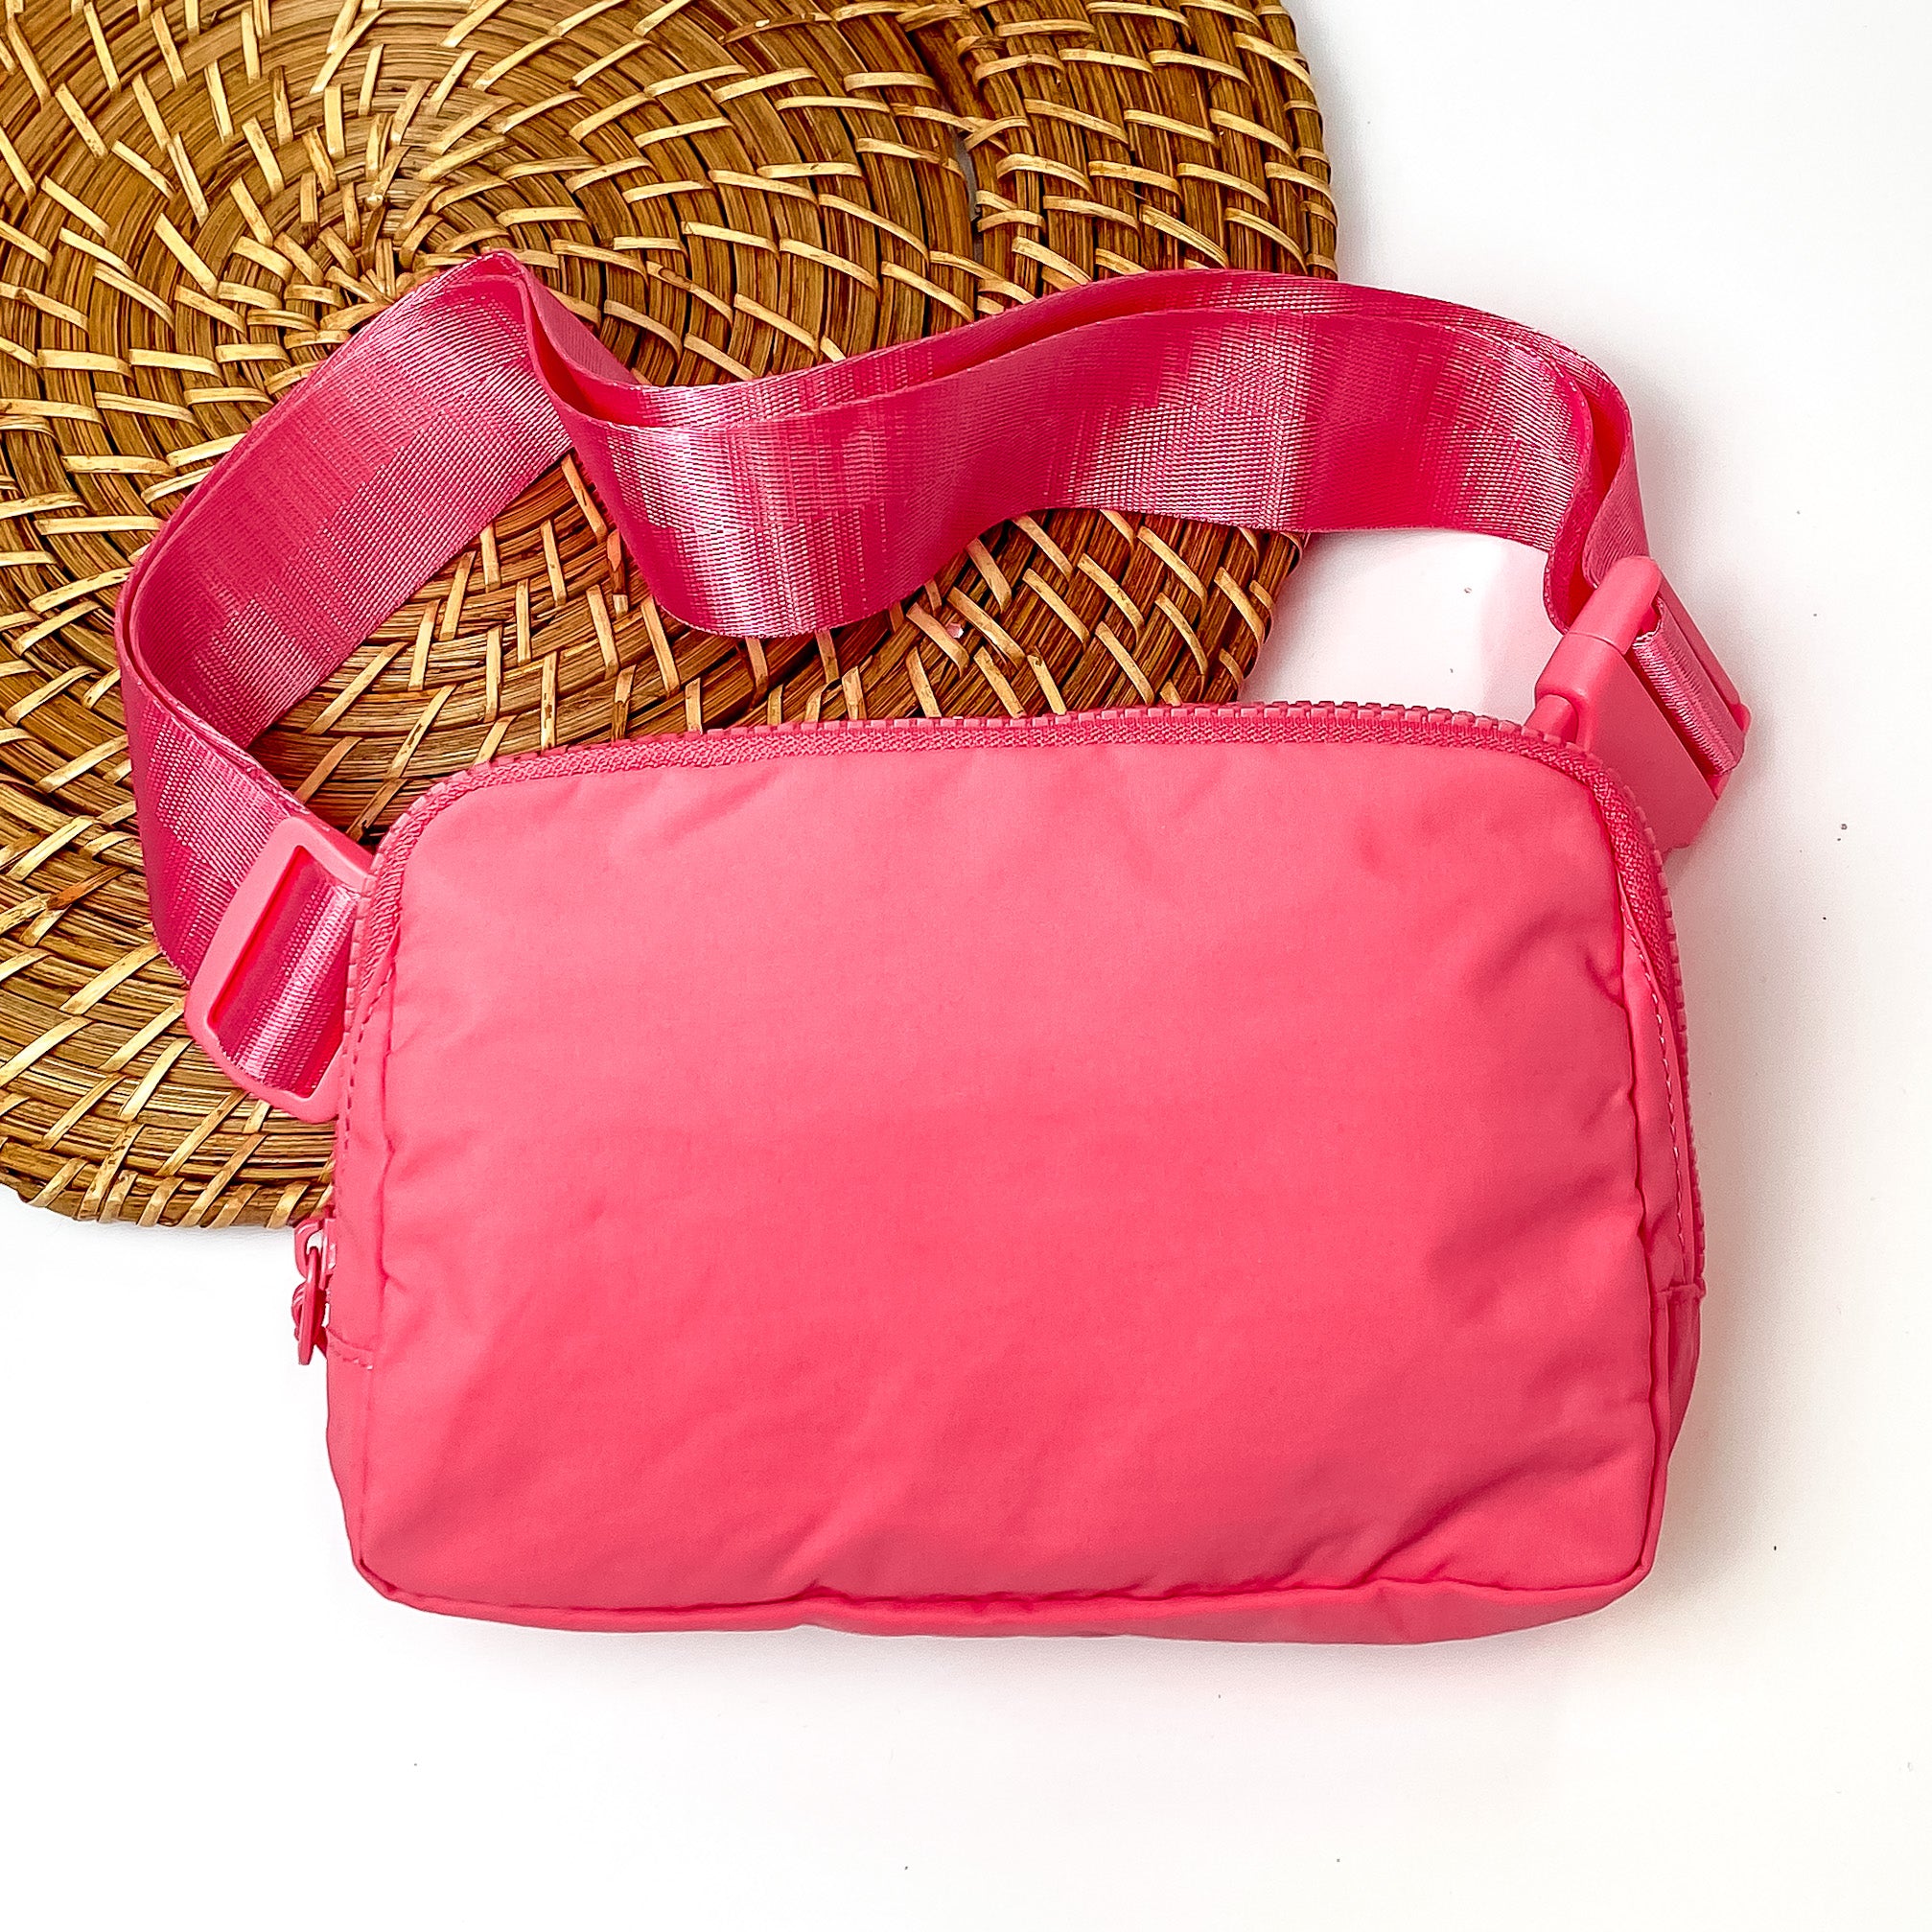 Pictured is a rectangle fanny pack with a top zipper with tassel in watermelon pink. This bag also includes a watermelon pink strap and watermelon pink accents. This bag is pictured on a white and brown patterned background. 